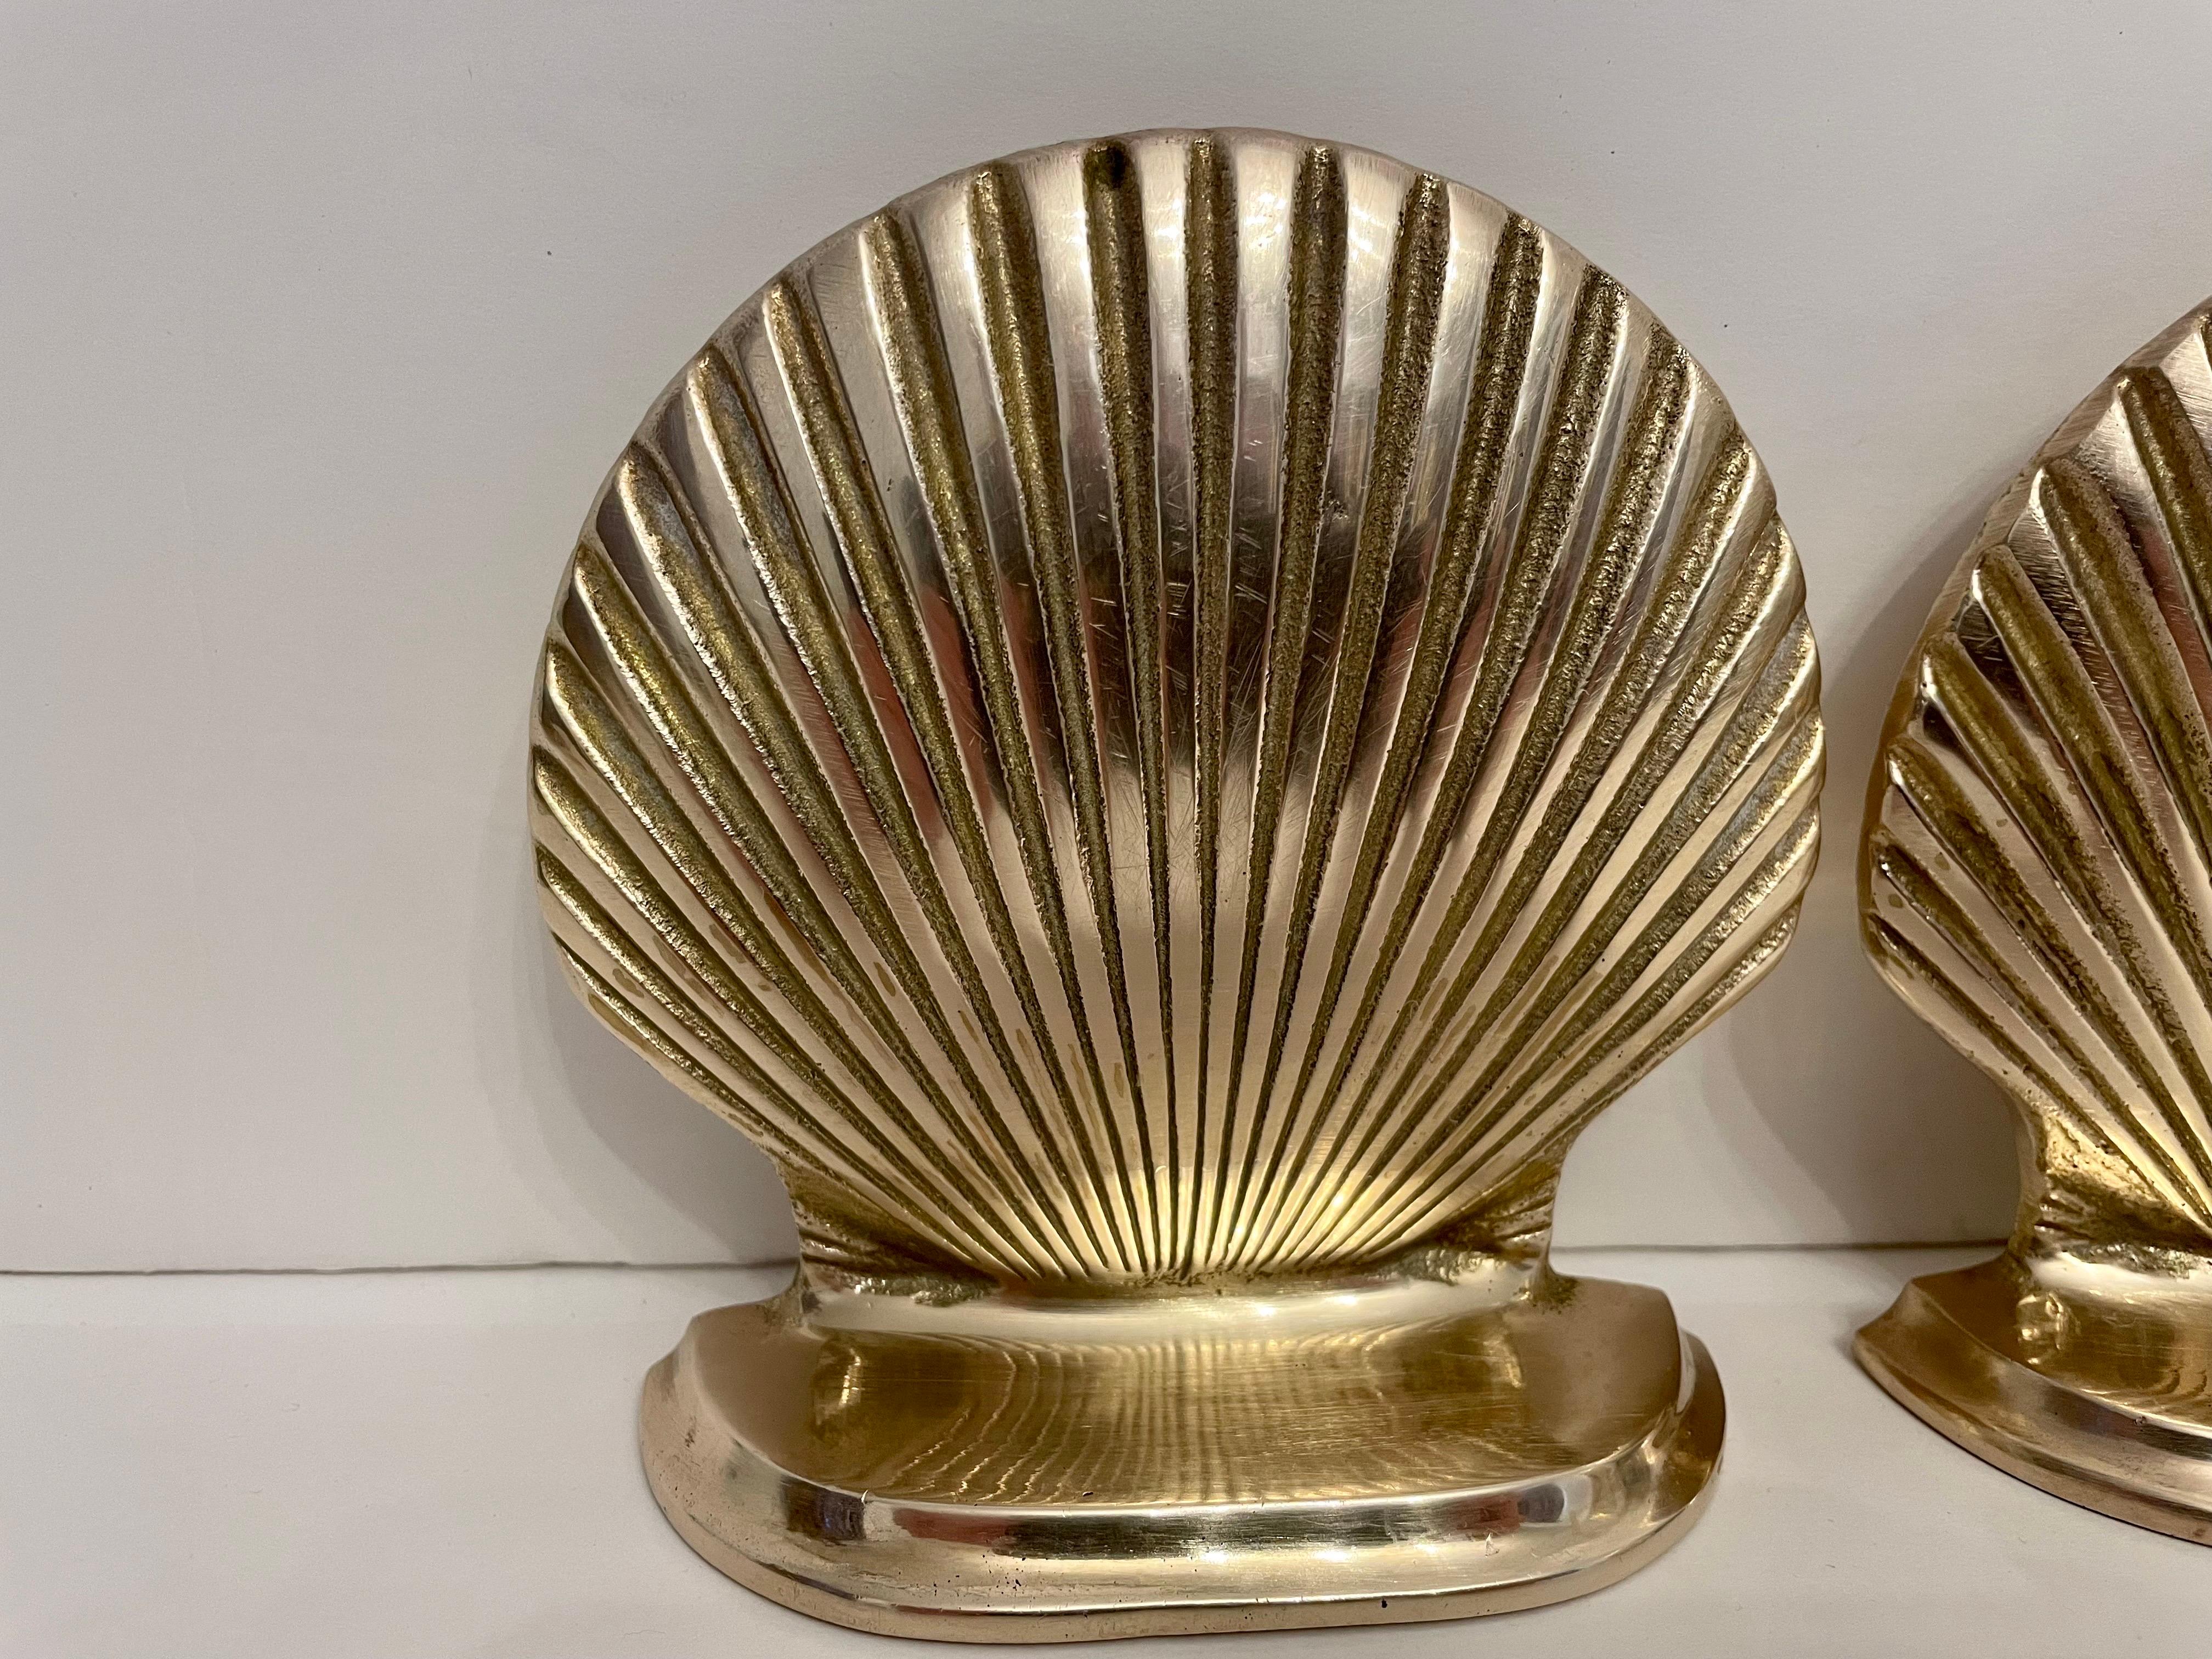 Nice, heavy brass scallop shell bookends. Heavy weight, will hold a nice stack of books. Solid Brass nicely cast with good details. Dark spots are shadows only.